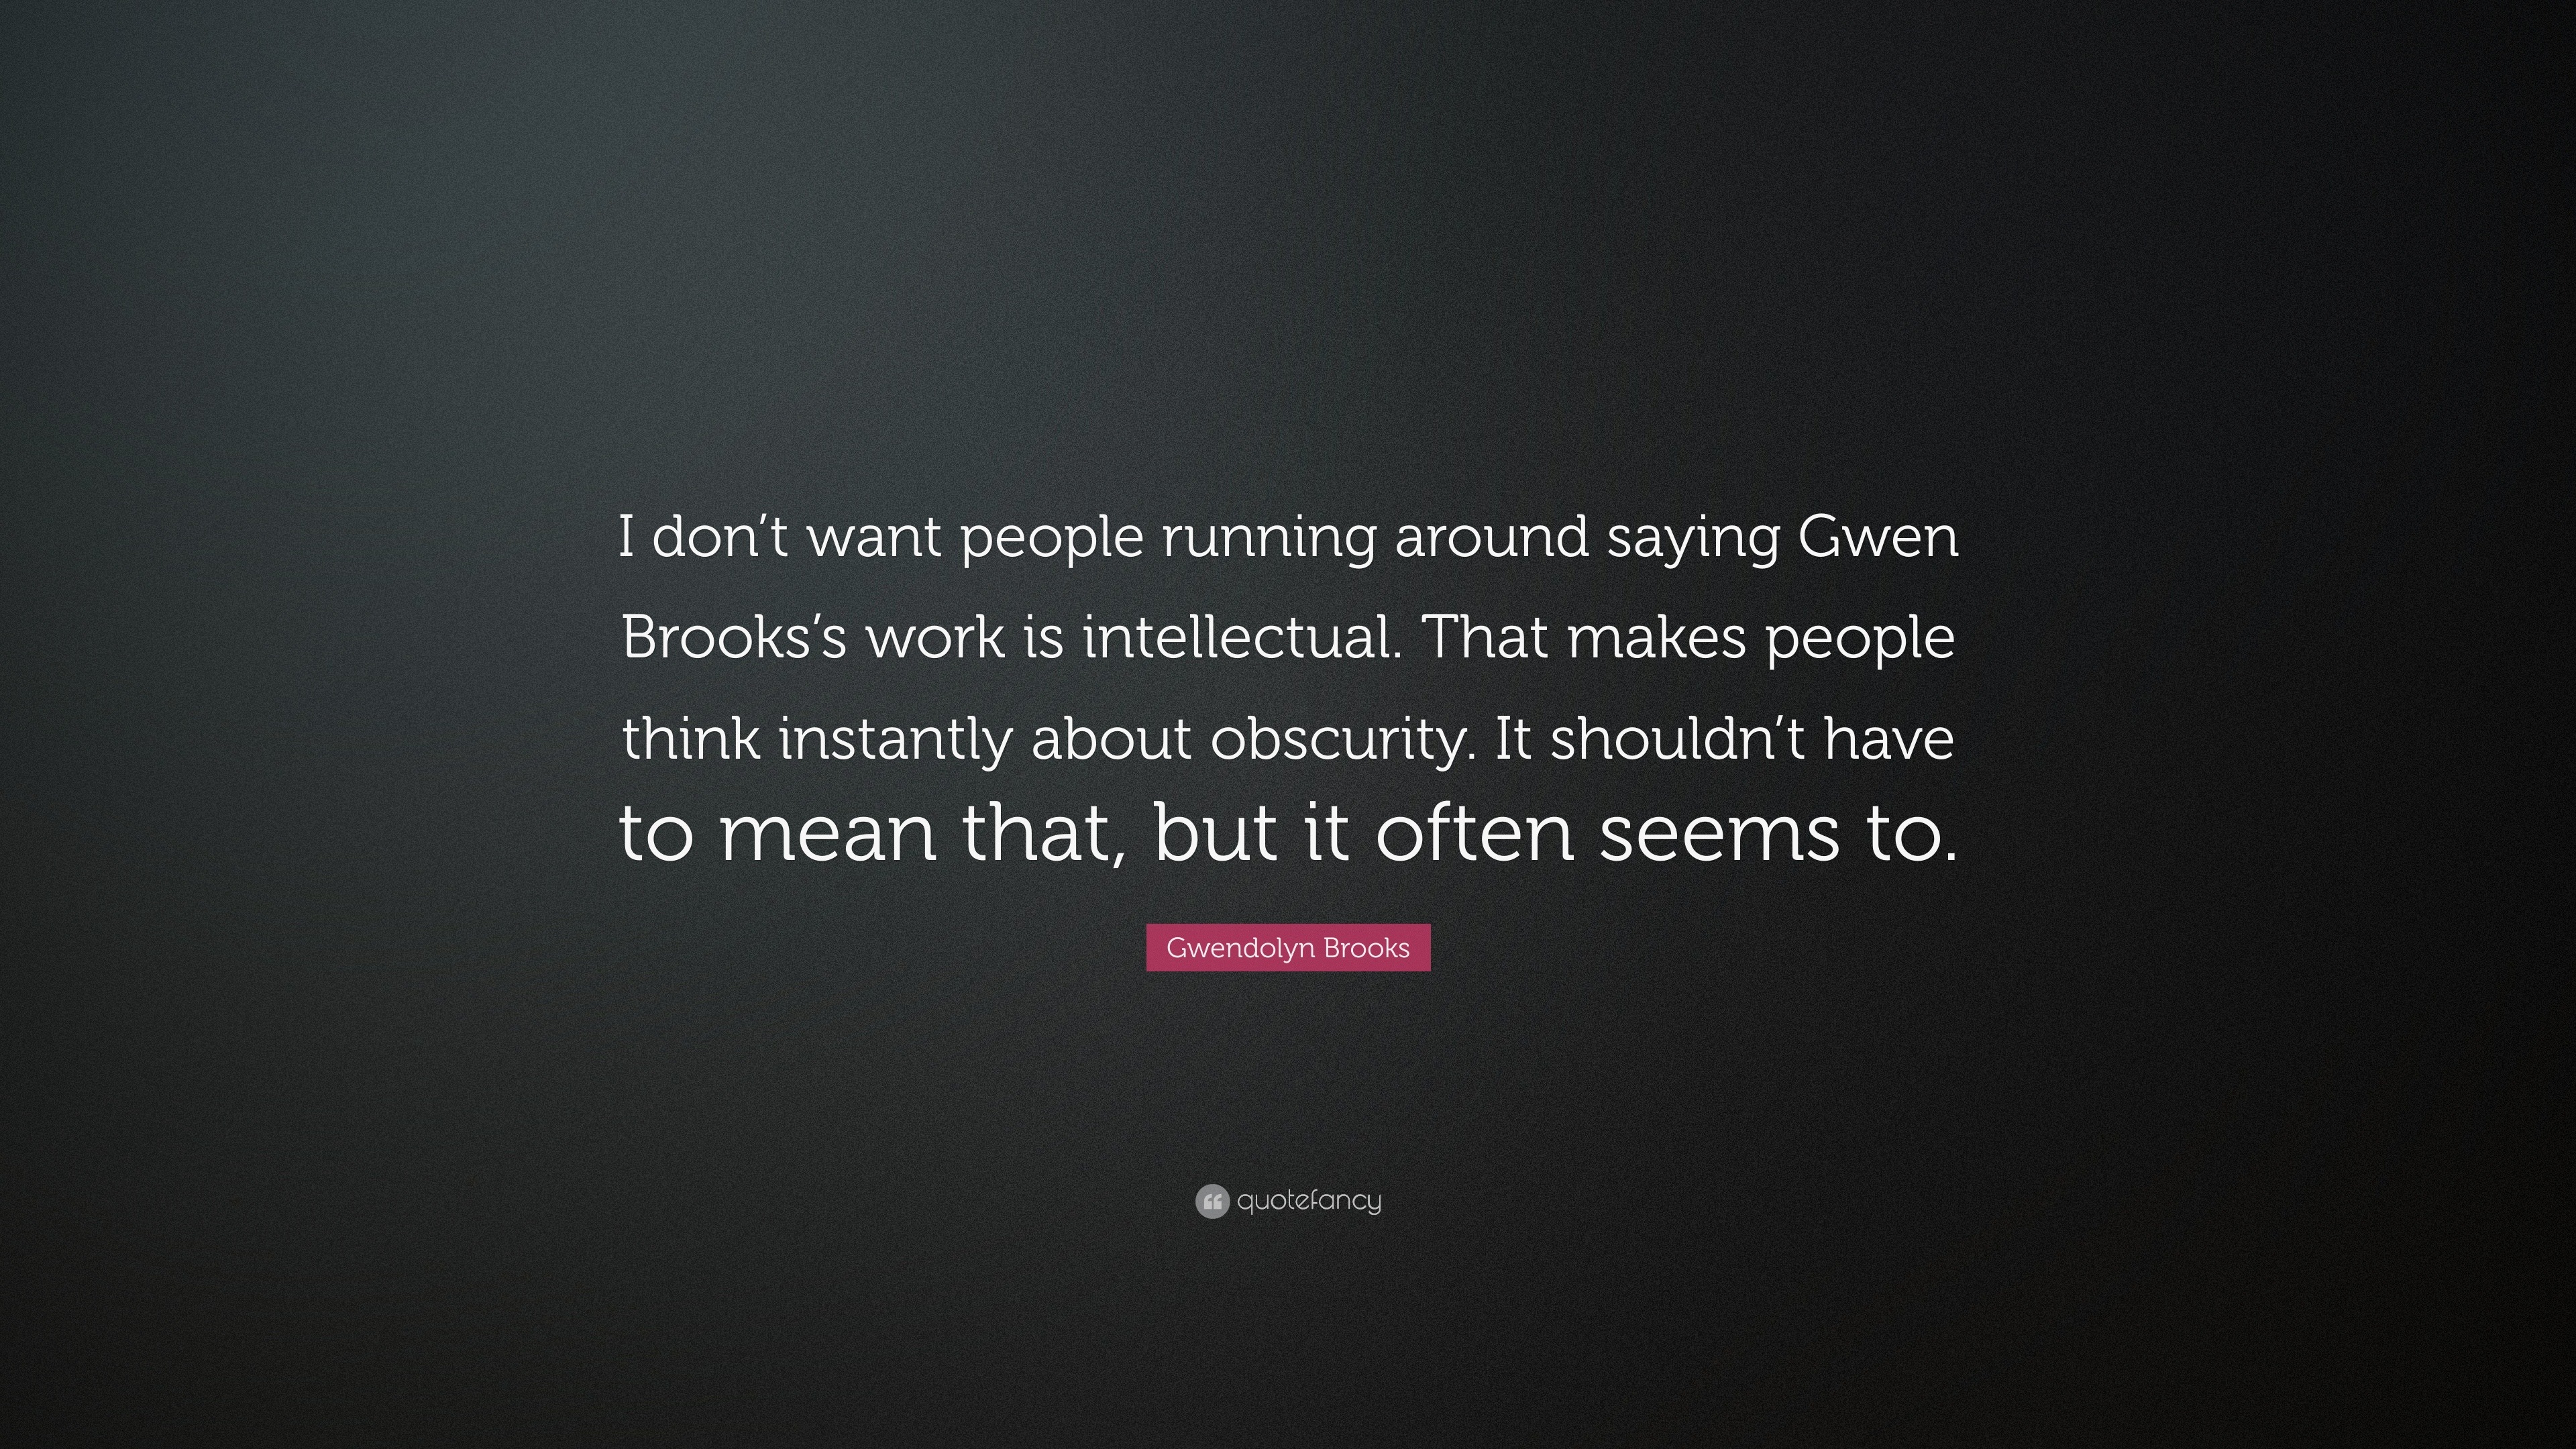 Gwendolyn Brooks Quote: “I don’t want people running around saying Gwen ...